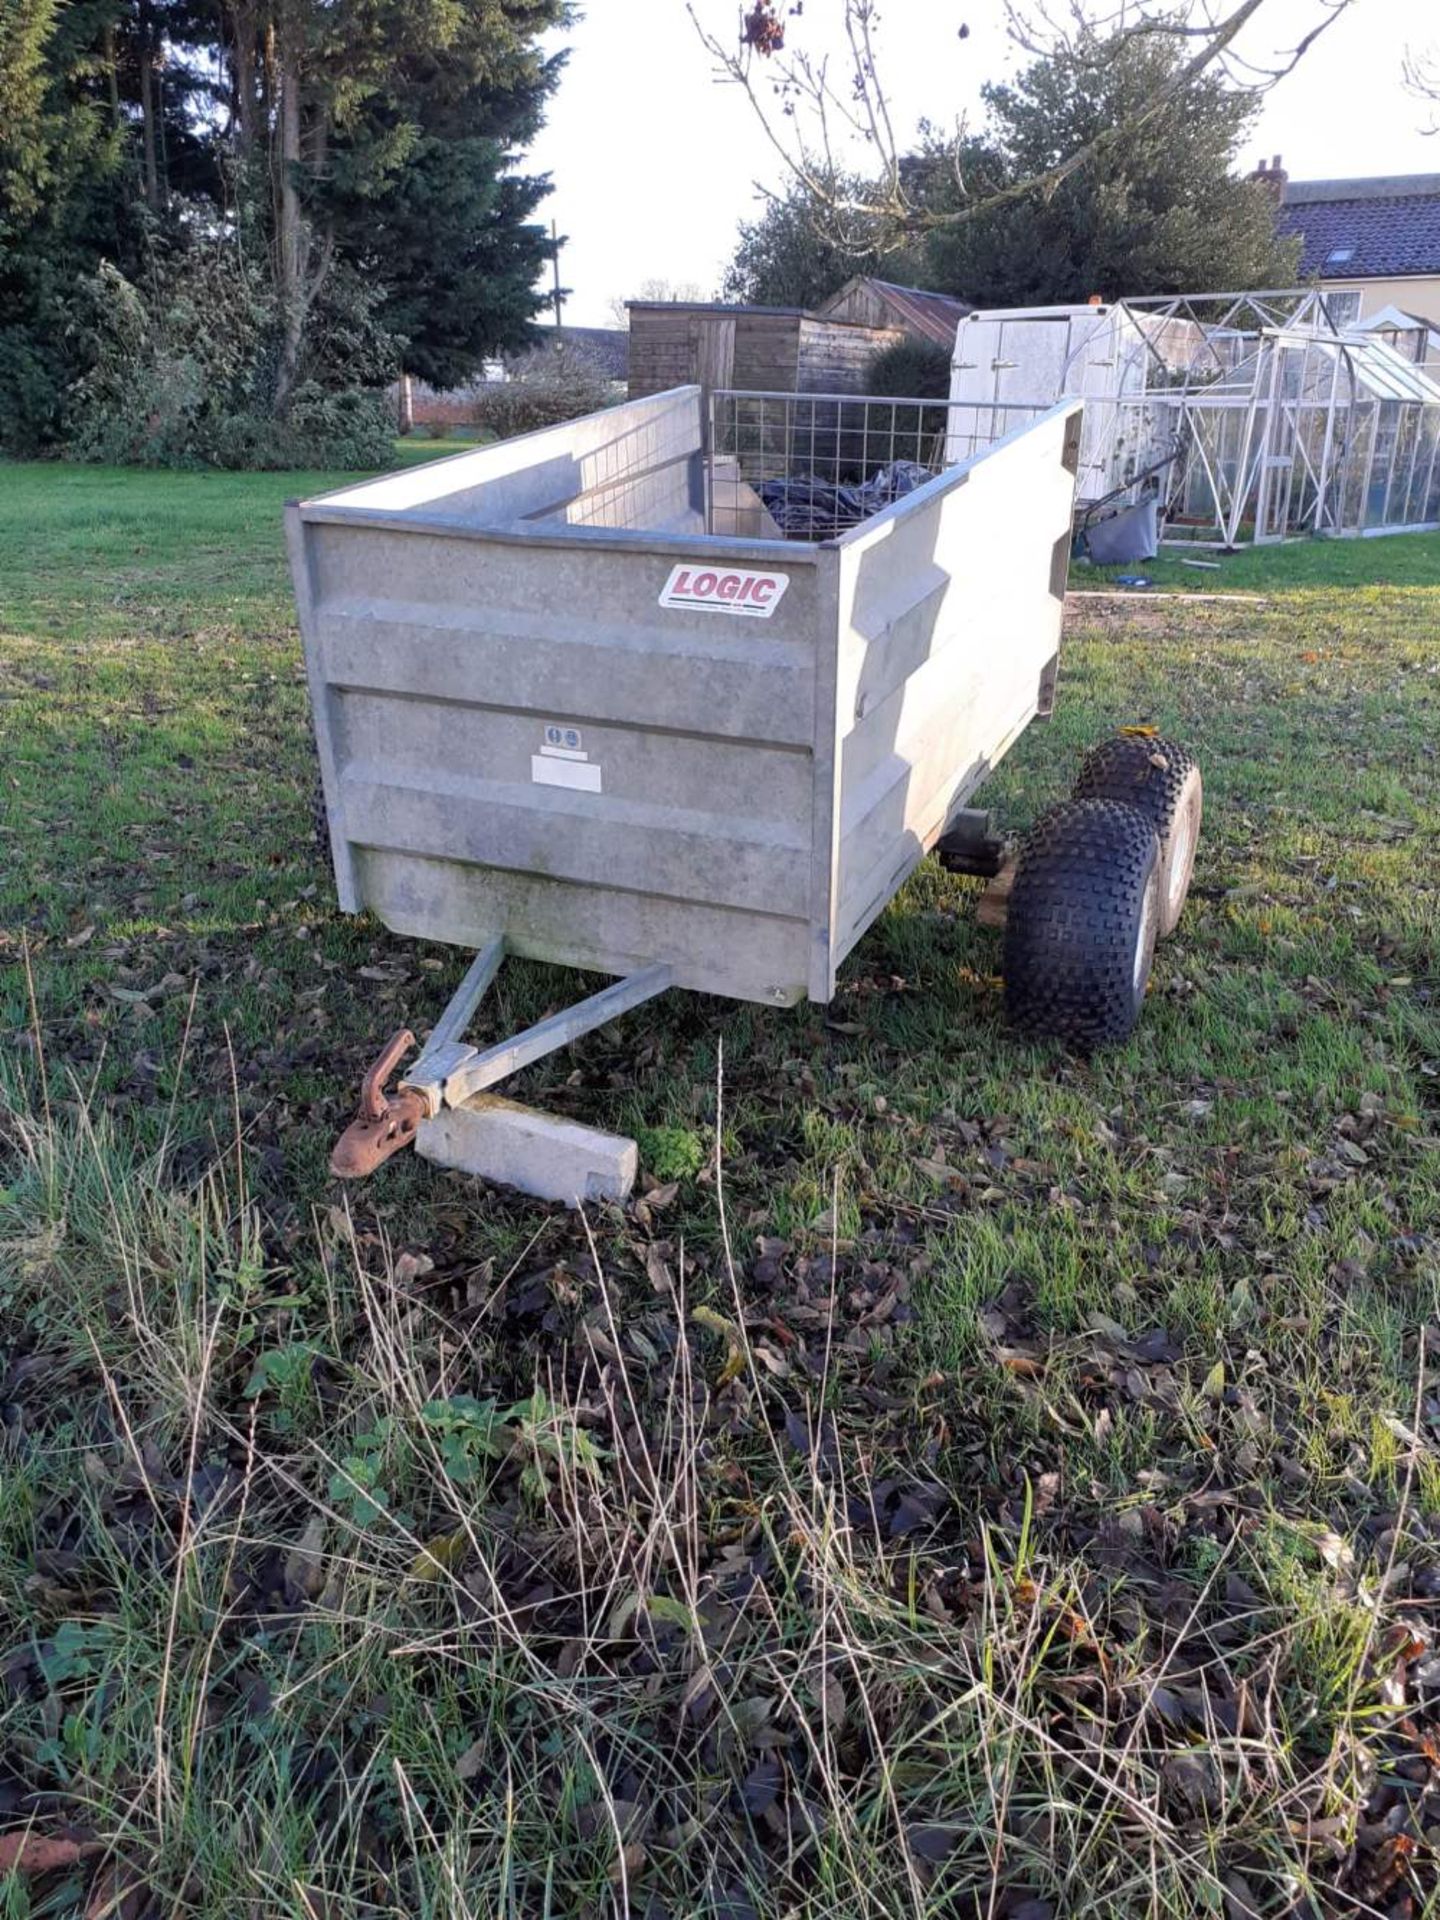 Logic Quad Trailer, had new tyres and floor. Stored near Badingham, Suffolk. - Image 2 of 3